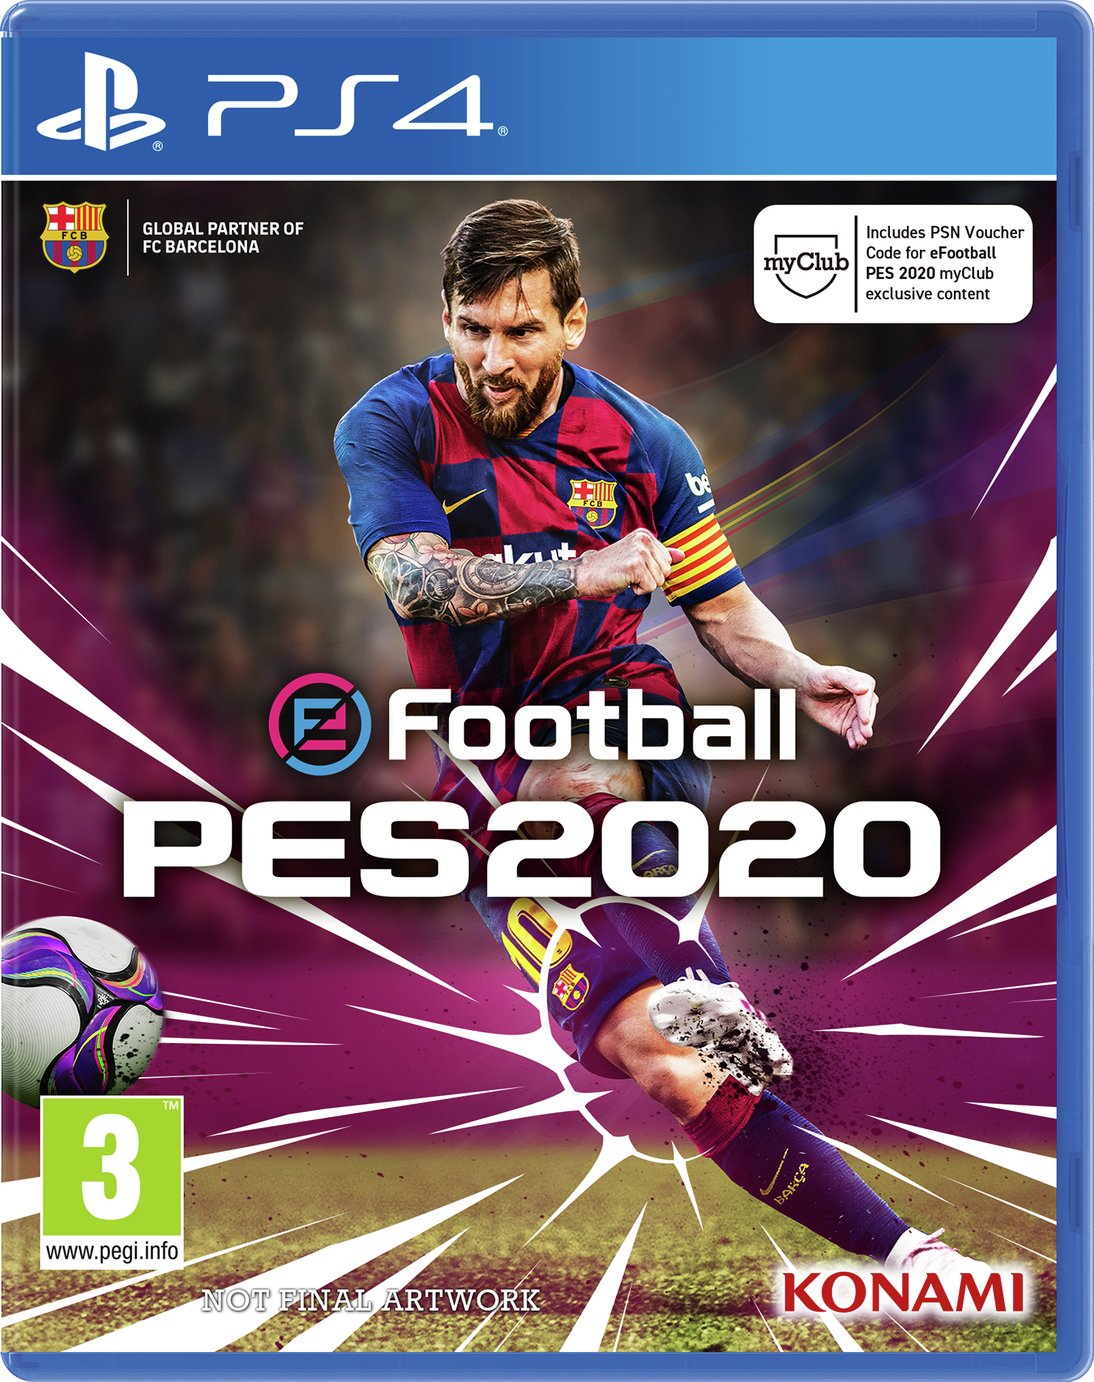 PES 2020 PS4 Game